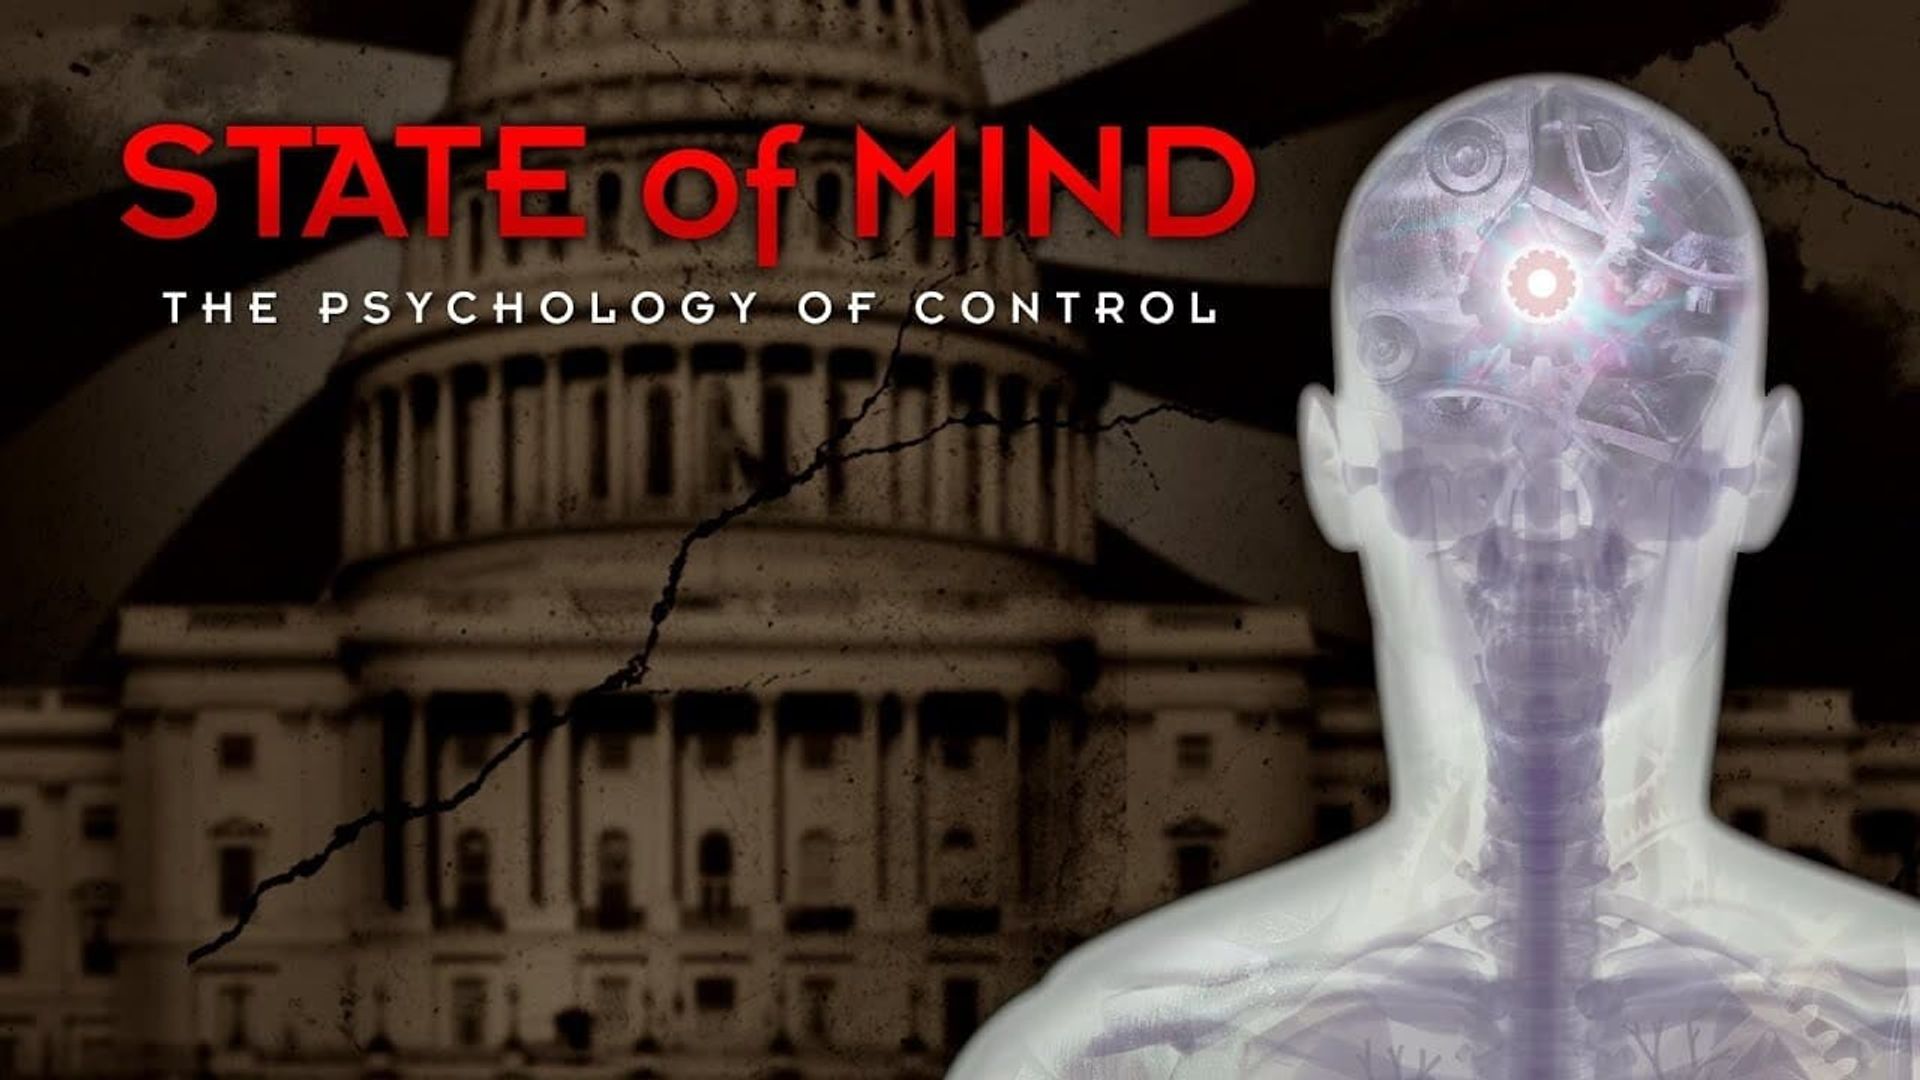 State of Mind: The Psychology of Control background